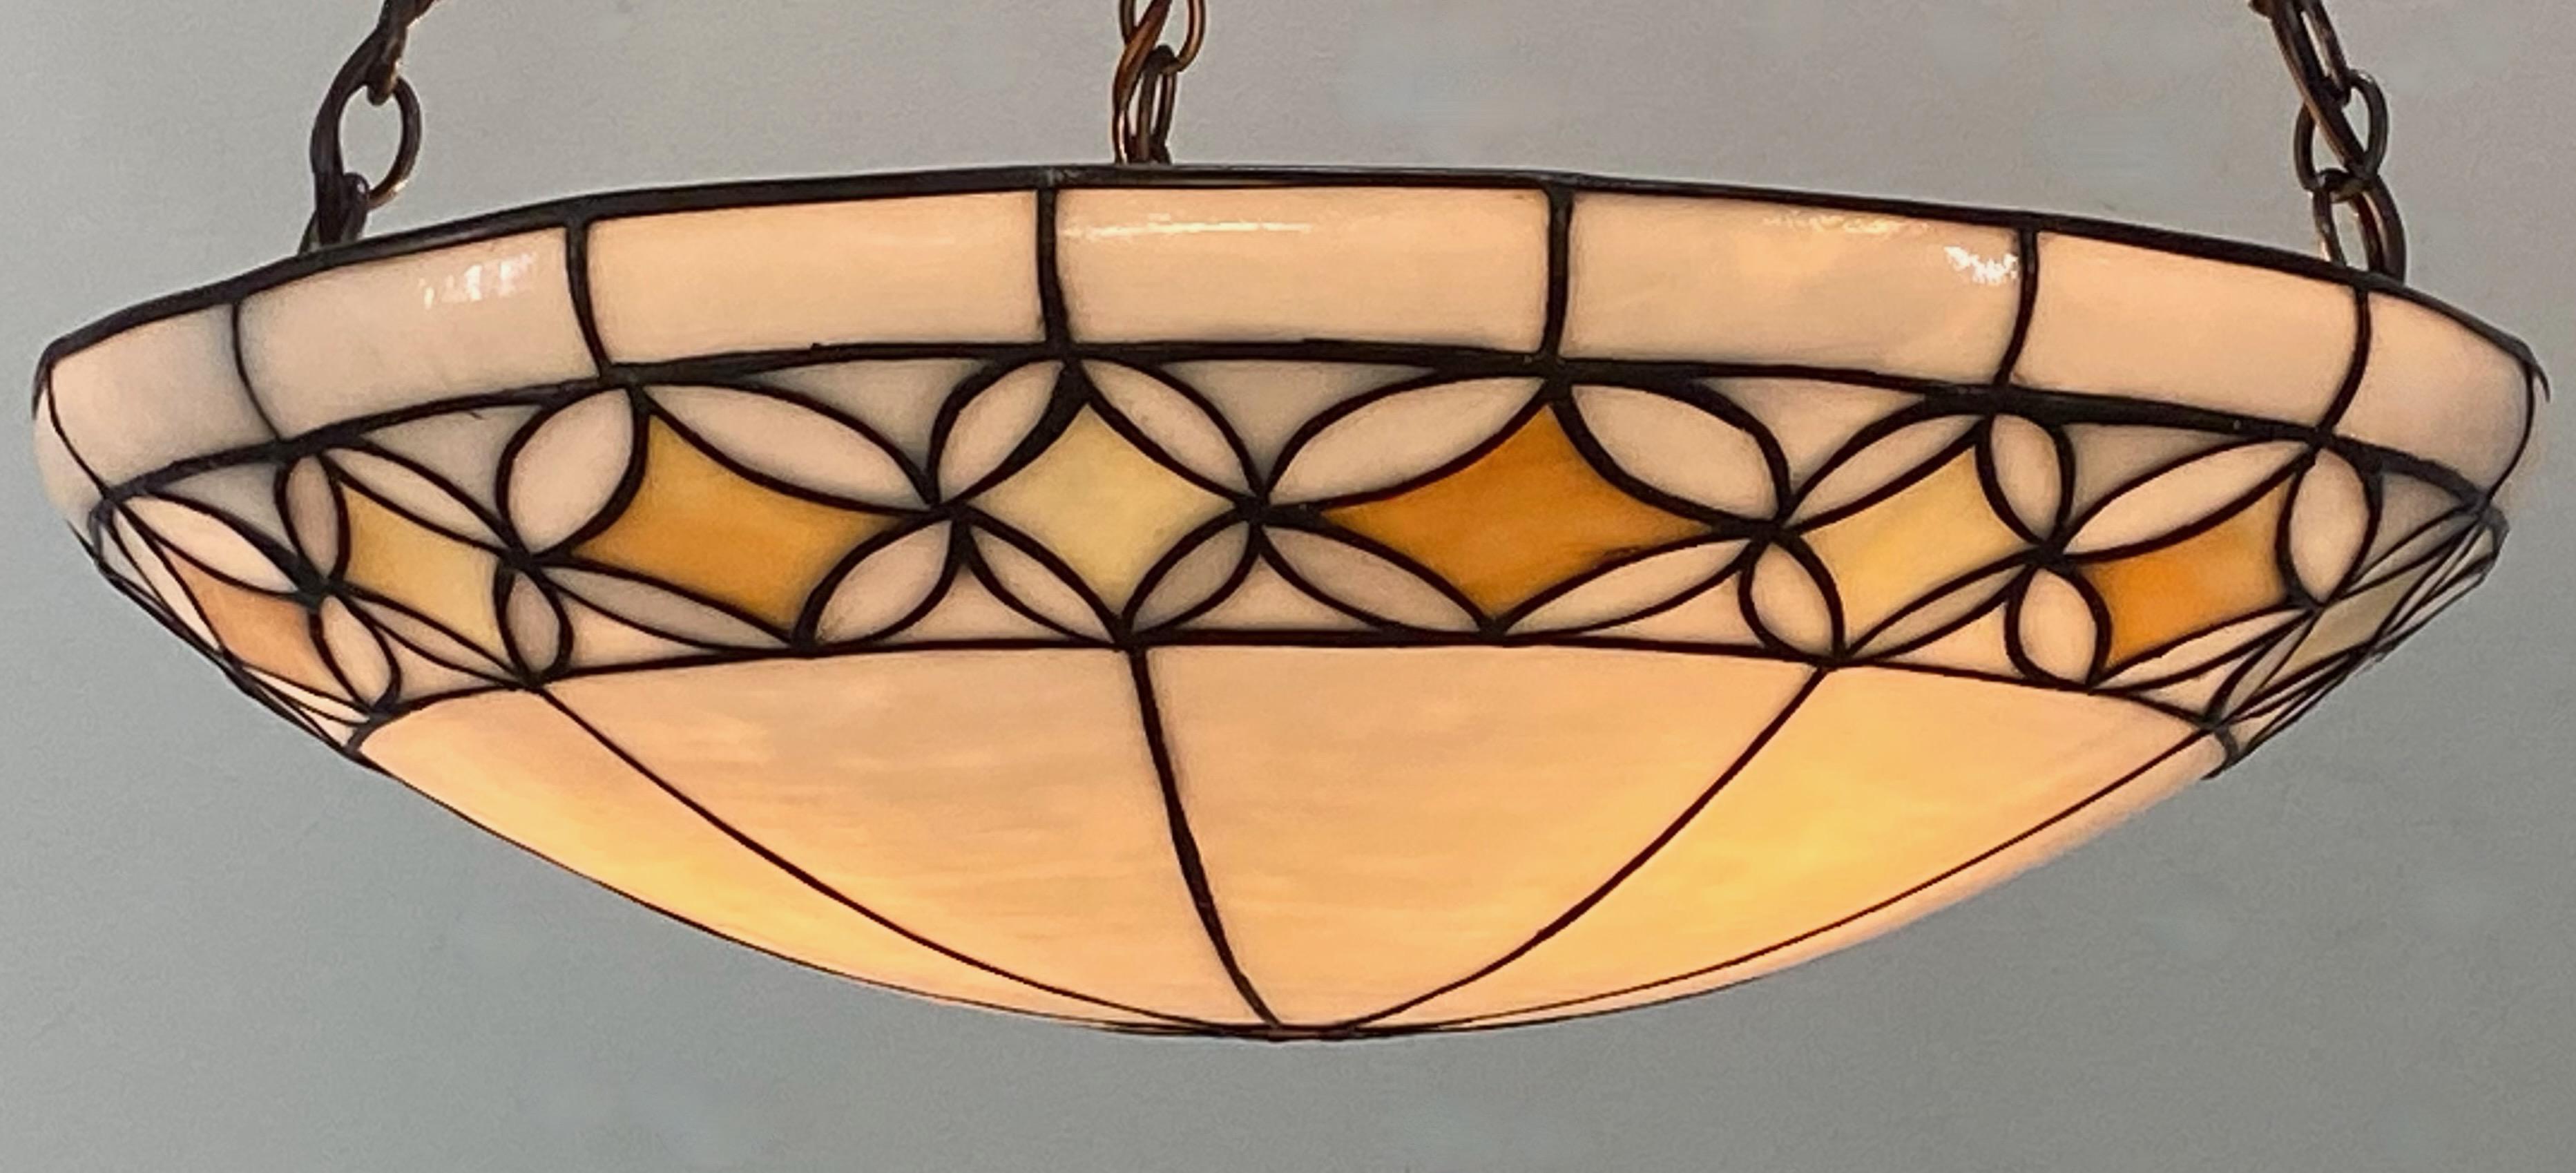 Antique Leaded Glass Pendant Light Fixture, American Early 20th Century 2